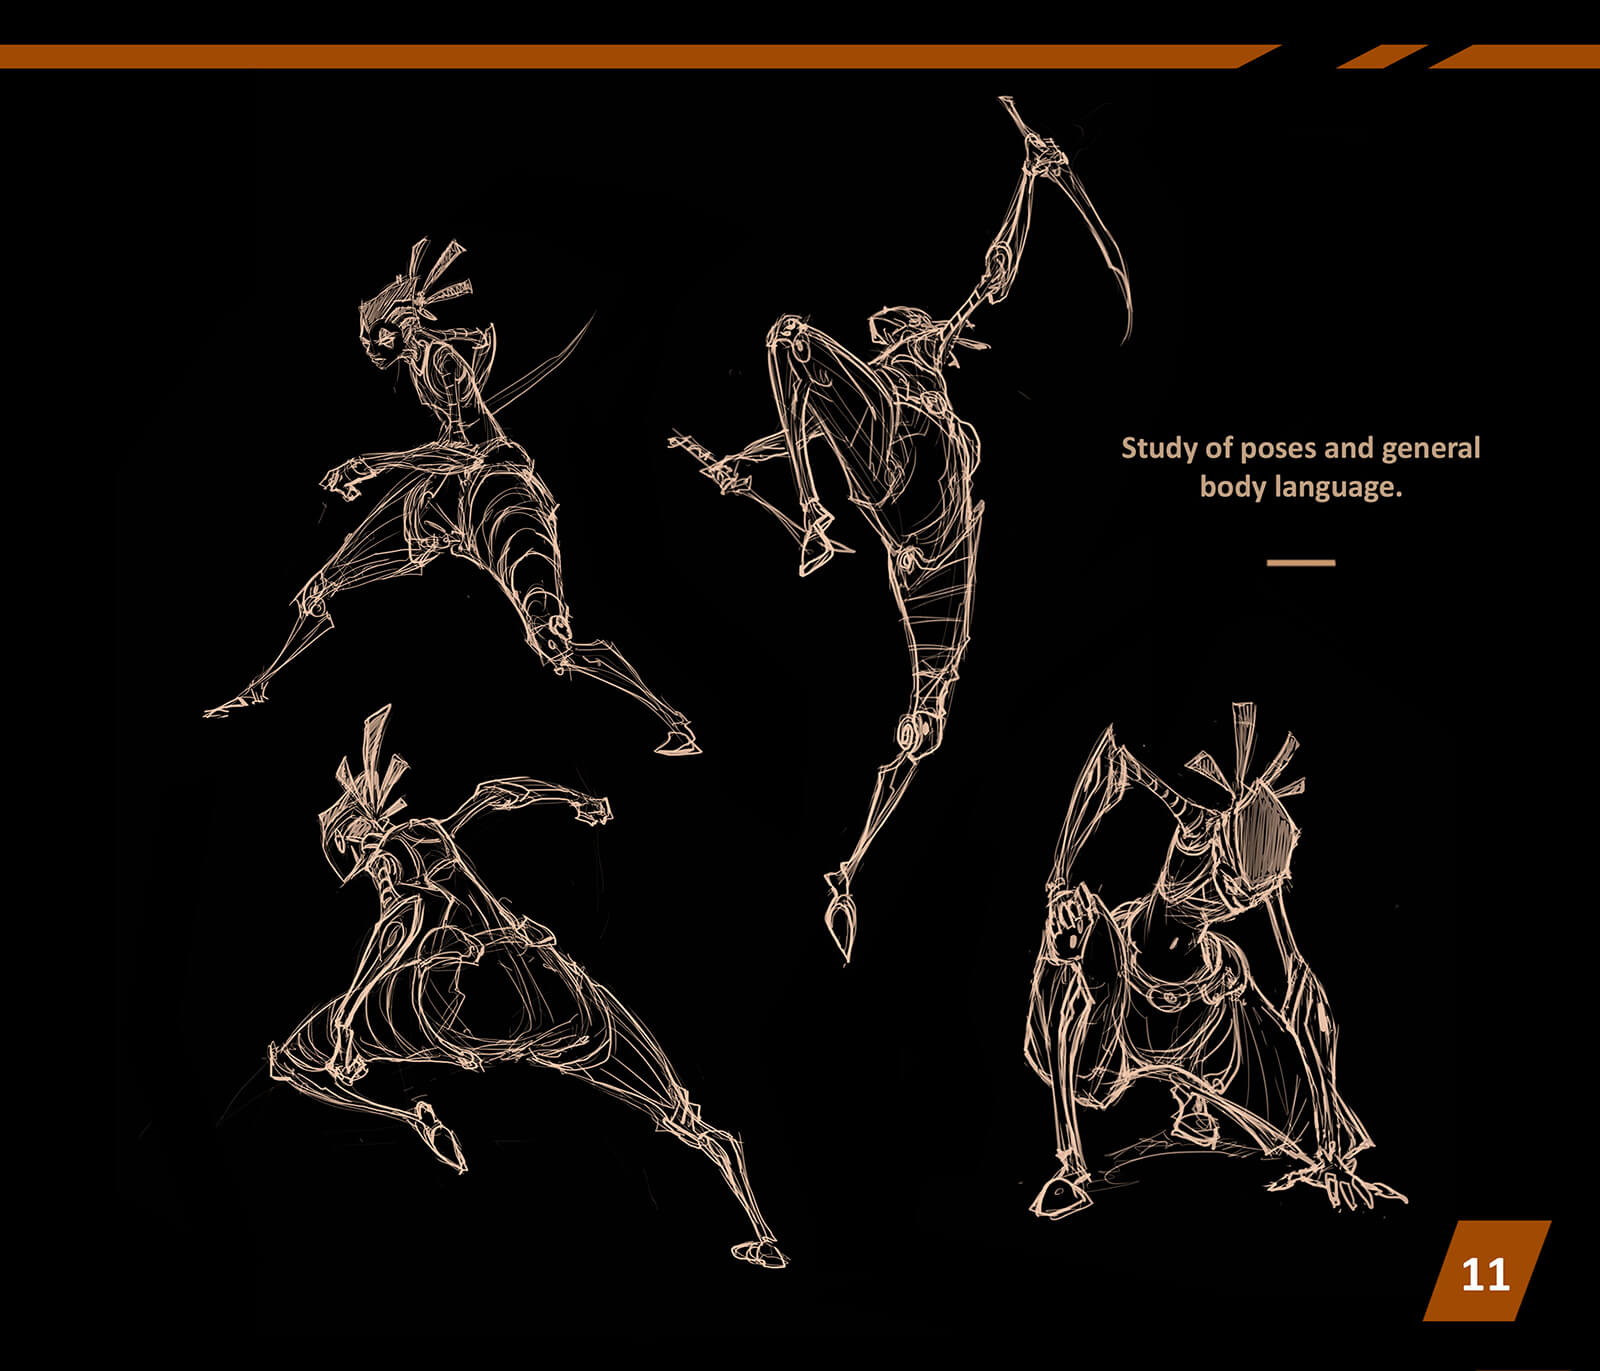 Sketches of a character in various mid-battle poses, bracing, crouching, and flying through the air with swords drawn